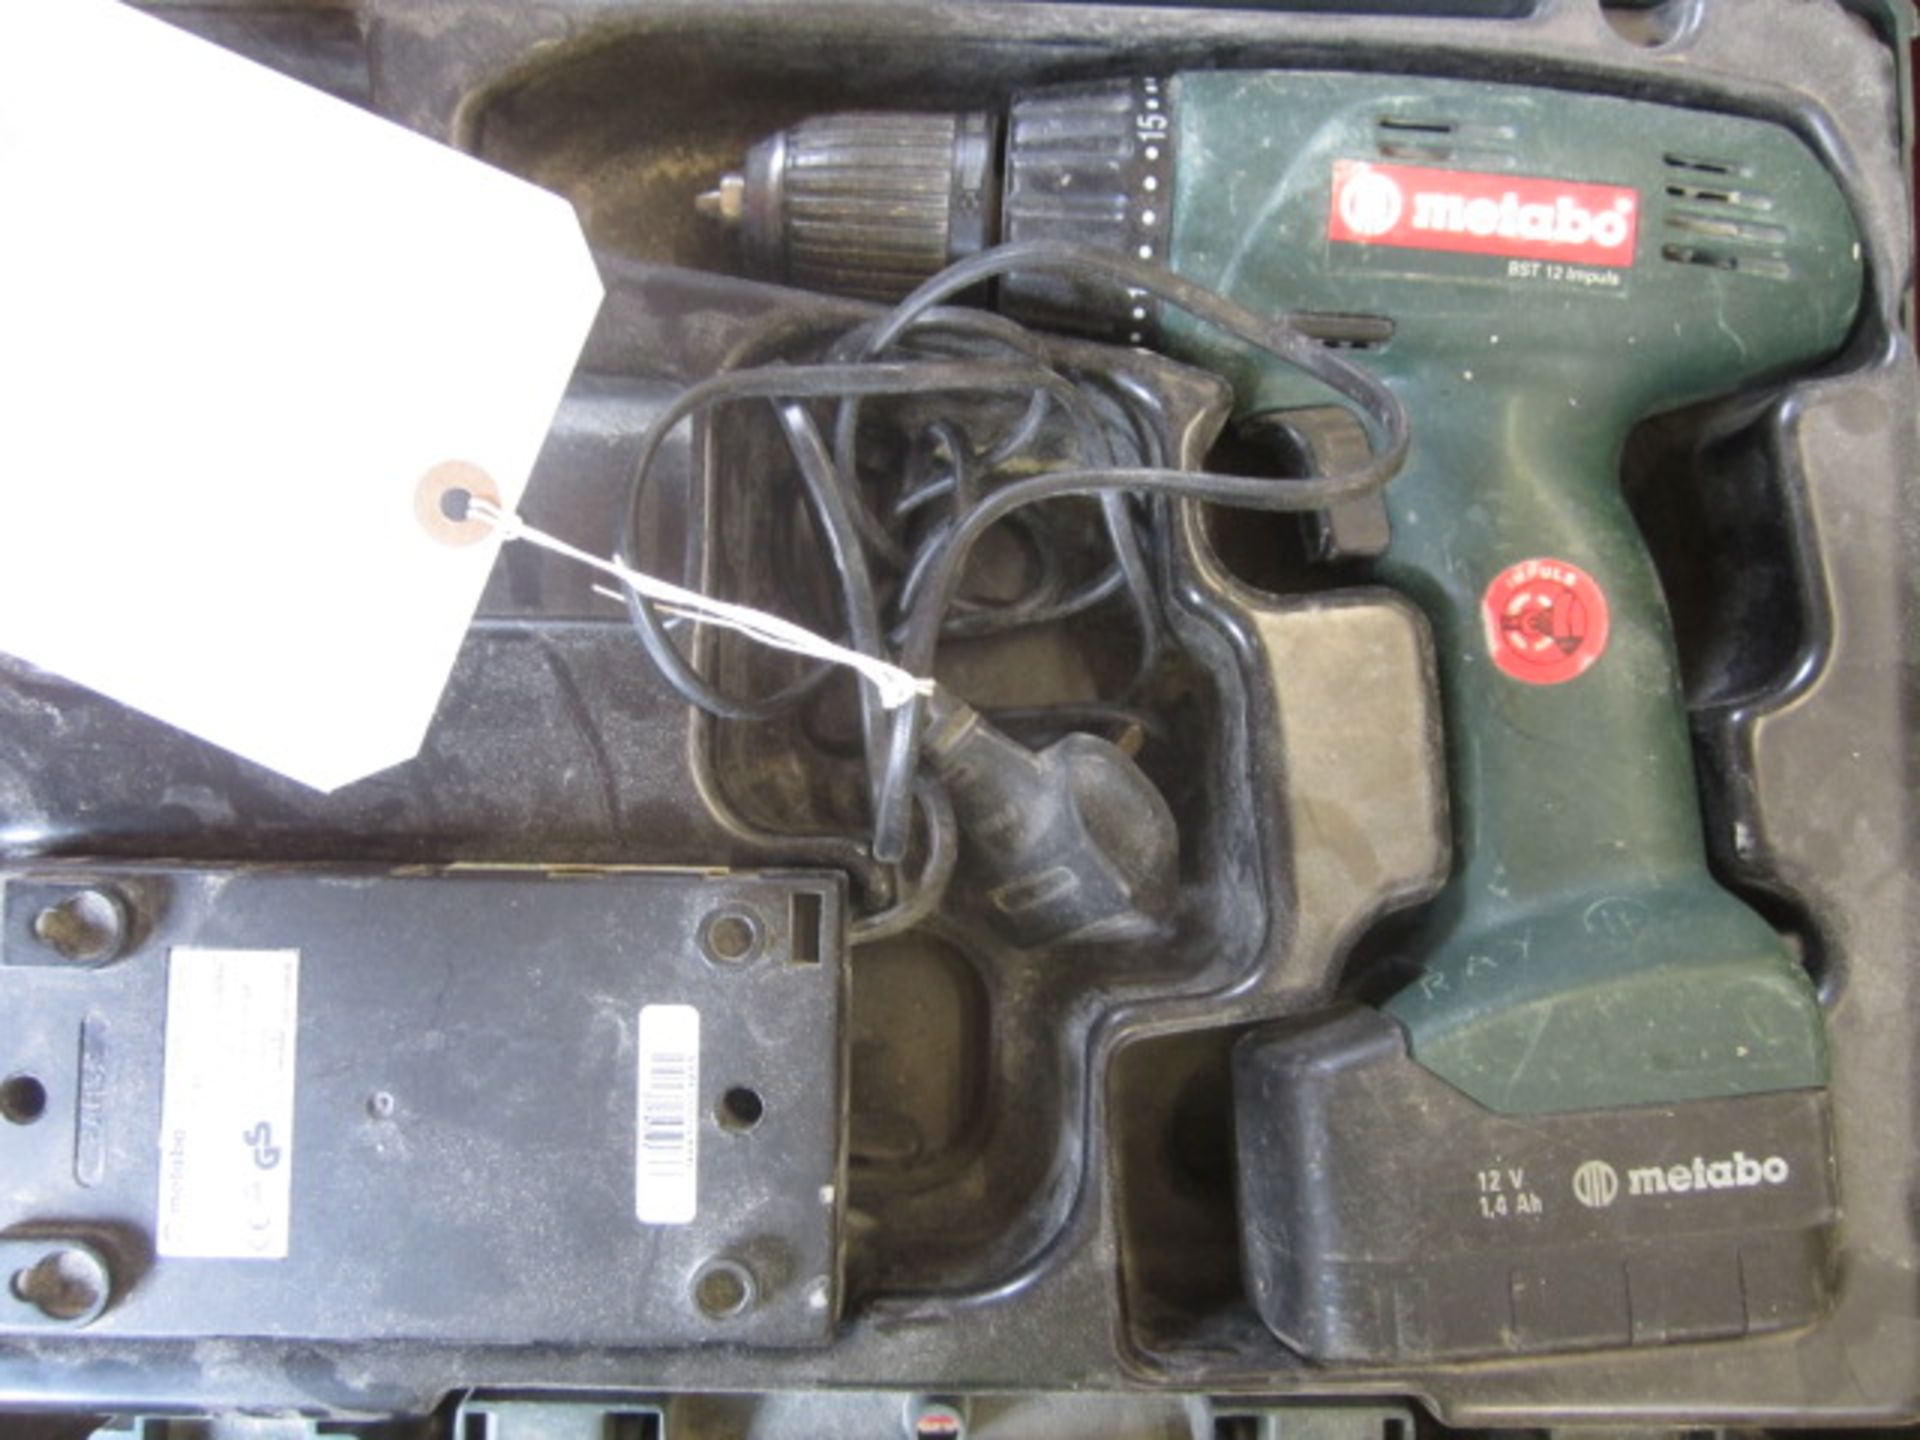 Metabo BST12 Impuls cordless drill, charger, battery, case